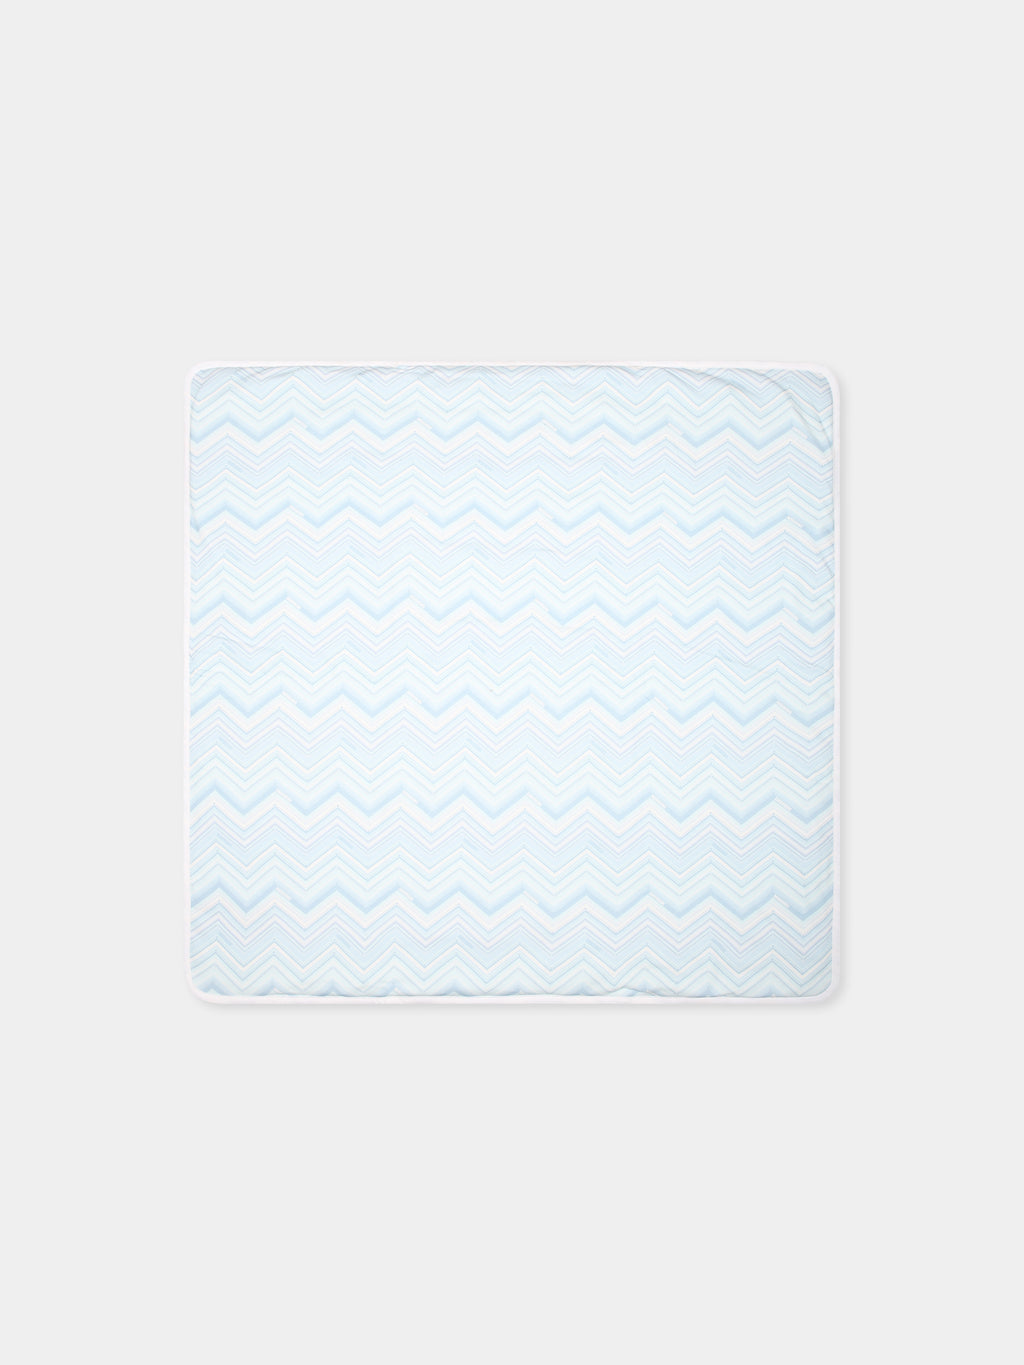 Light blue blanket for baby boy with chevron pattern